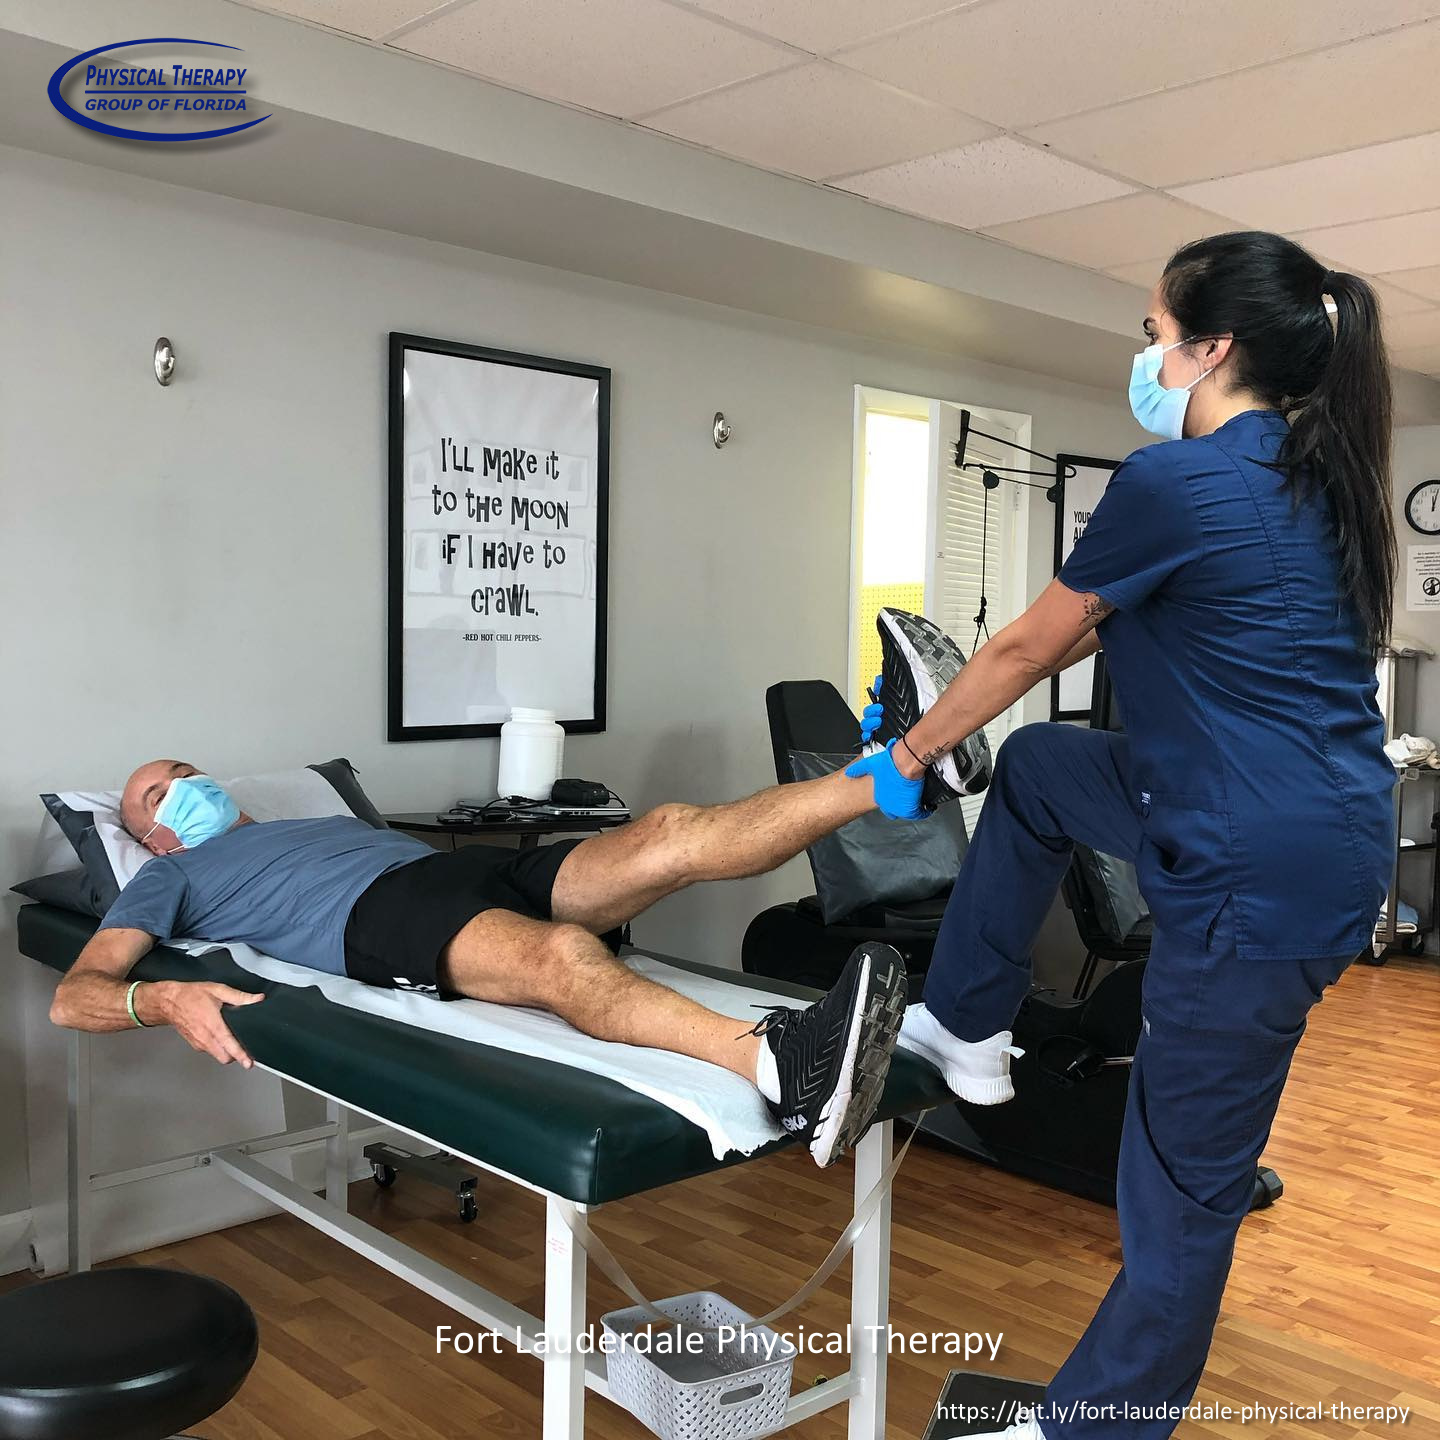 Physical Therapy Group of Florida & Cryohealth Fort Lauderdale